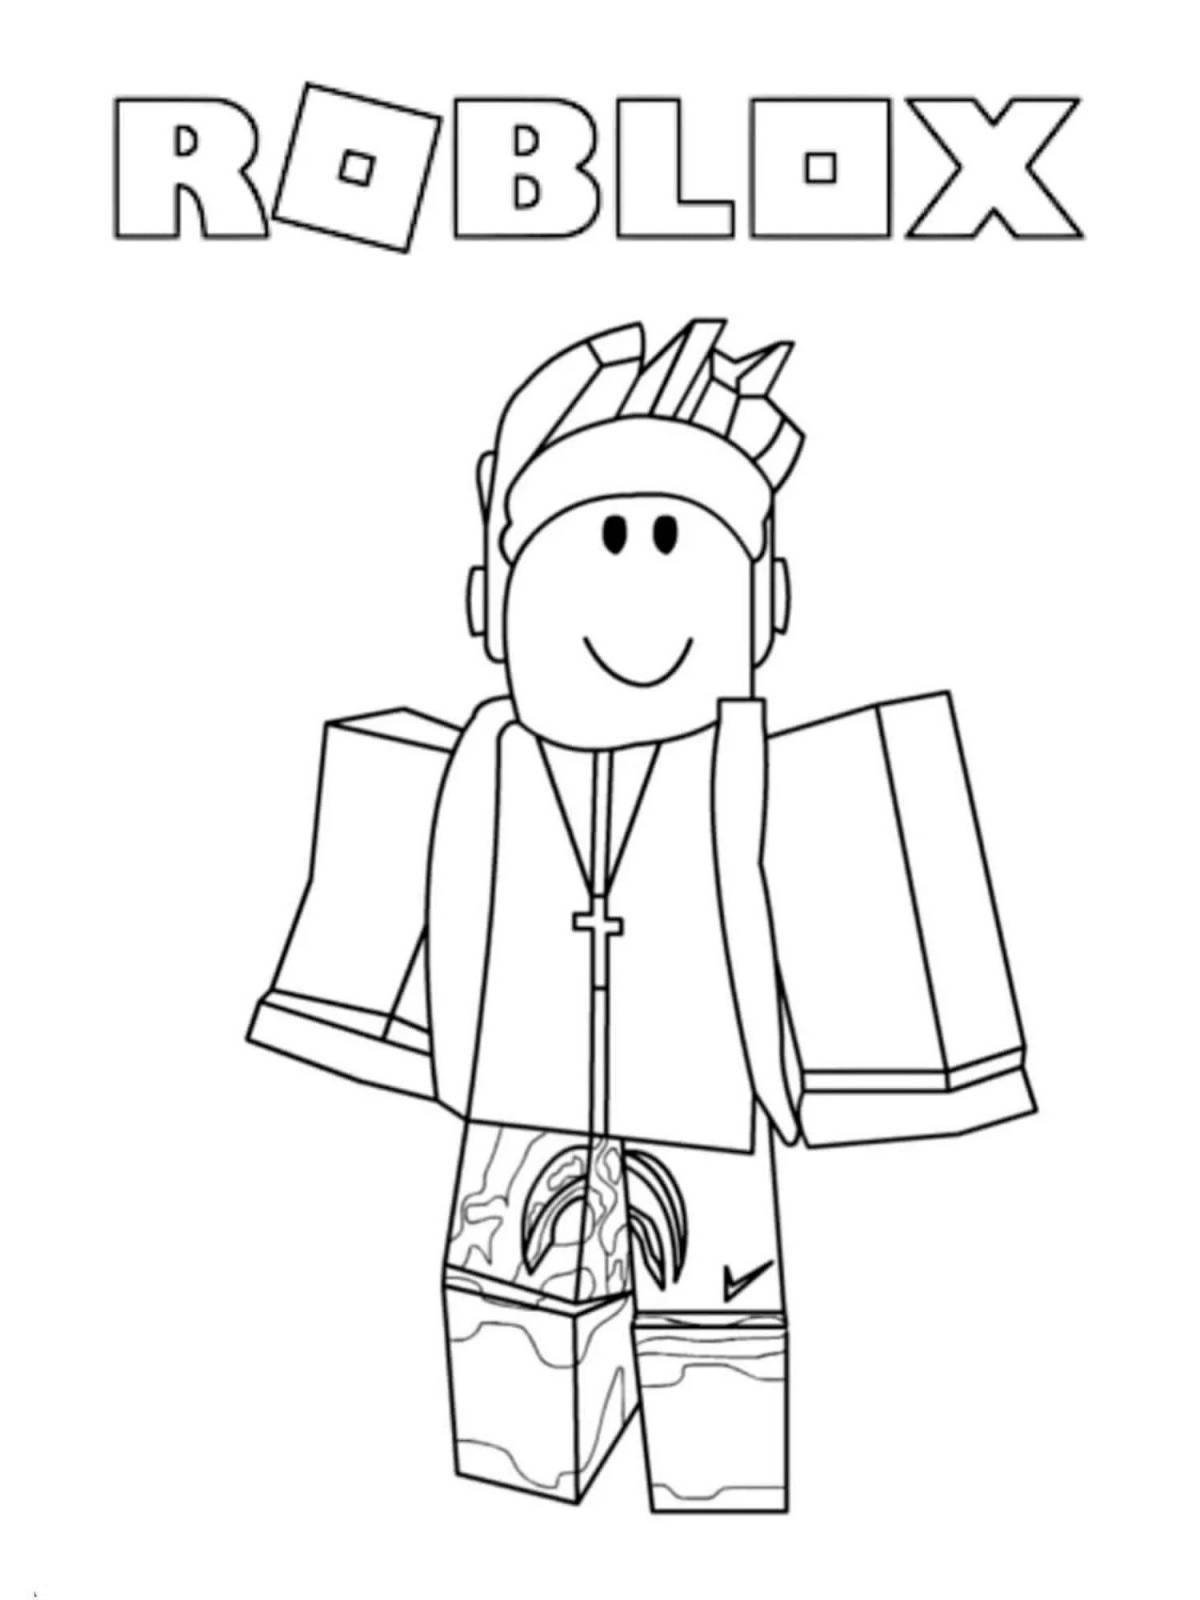 Roblox characters girls awesome coloring pages